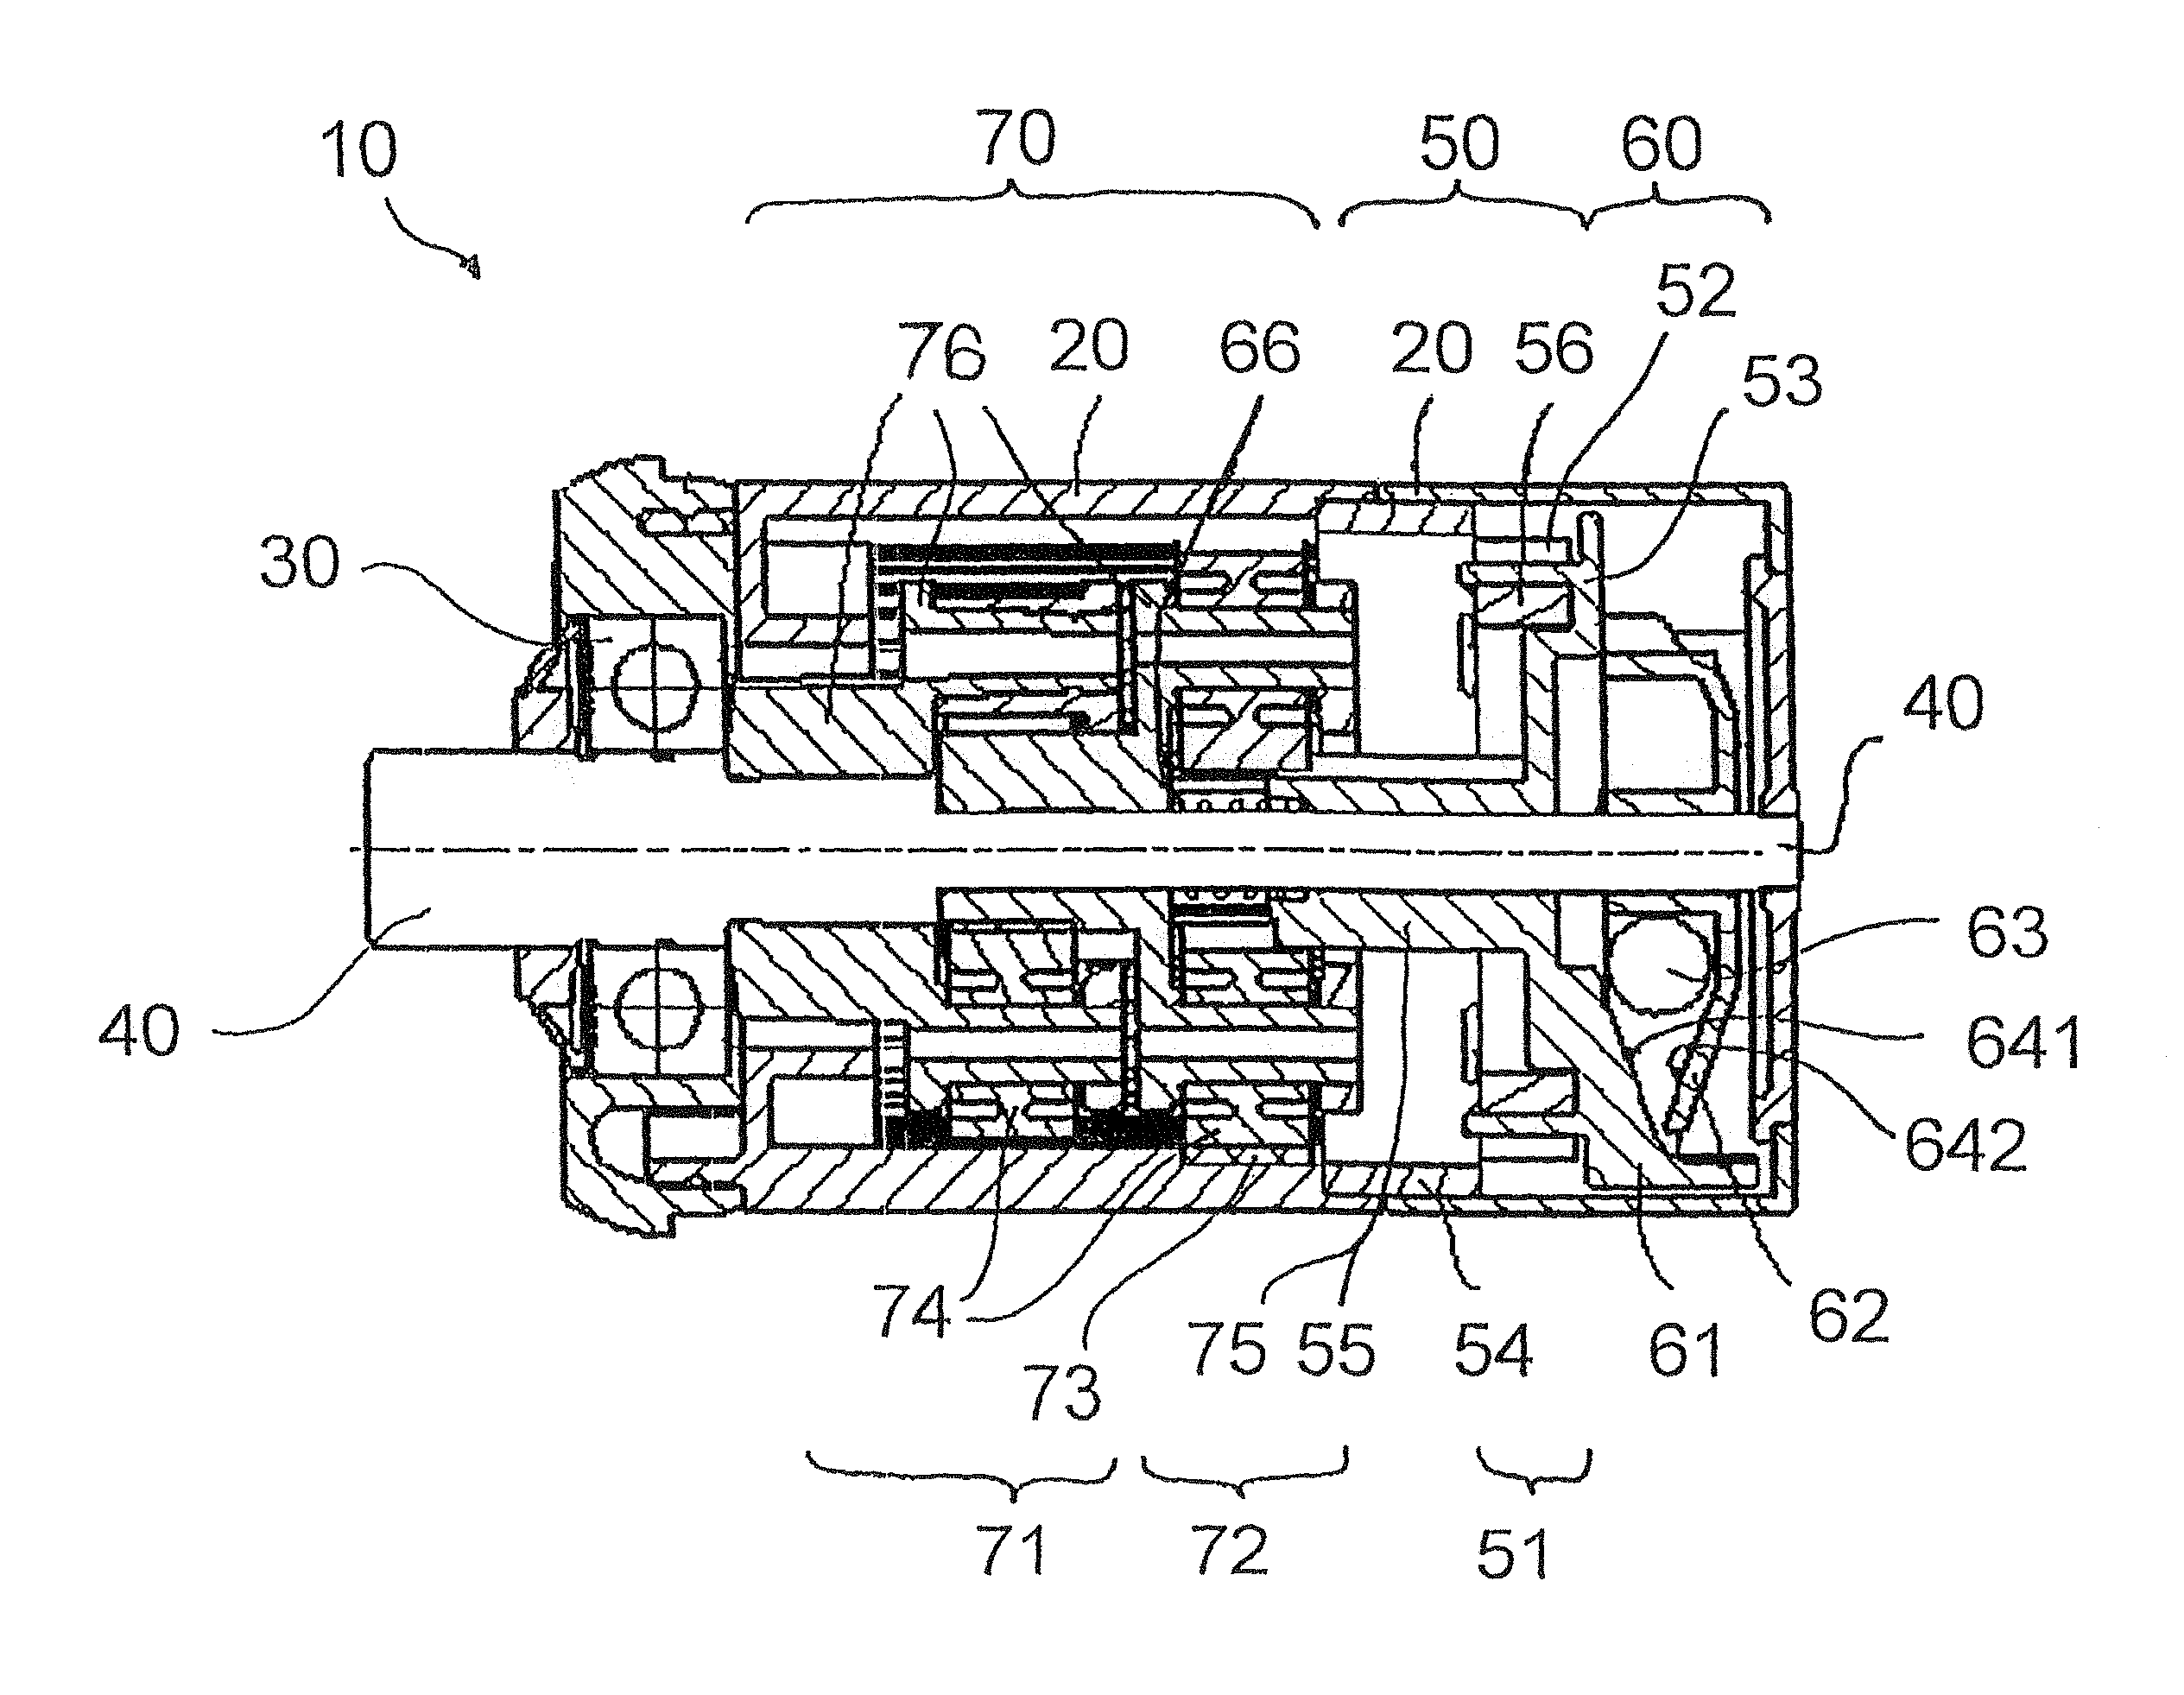 Conveyor roll with centrifugal force-operated magnetic brake